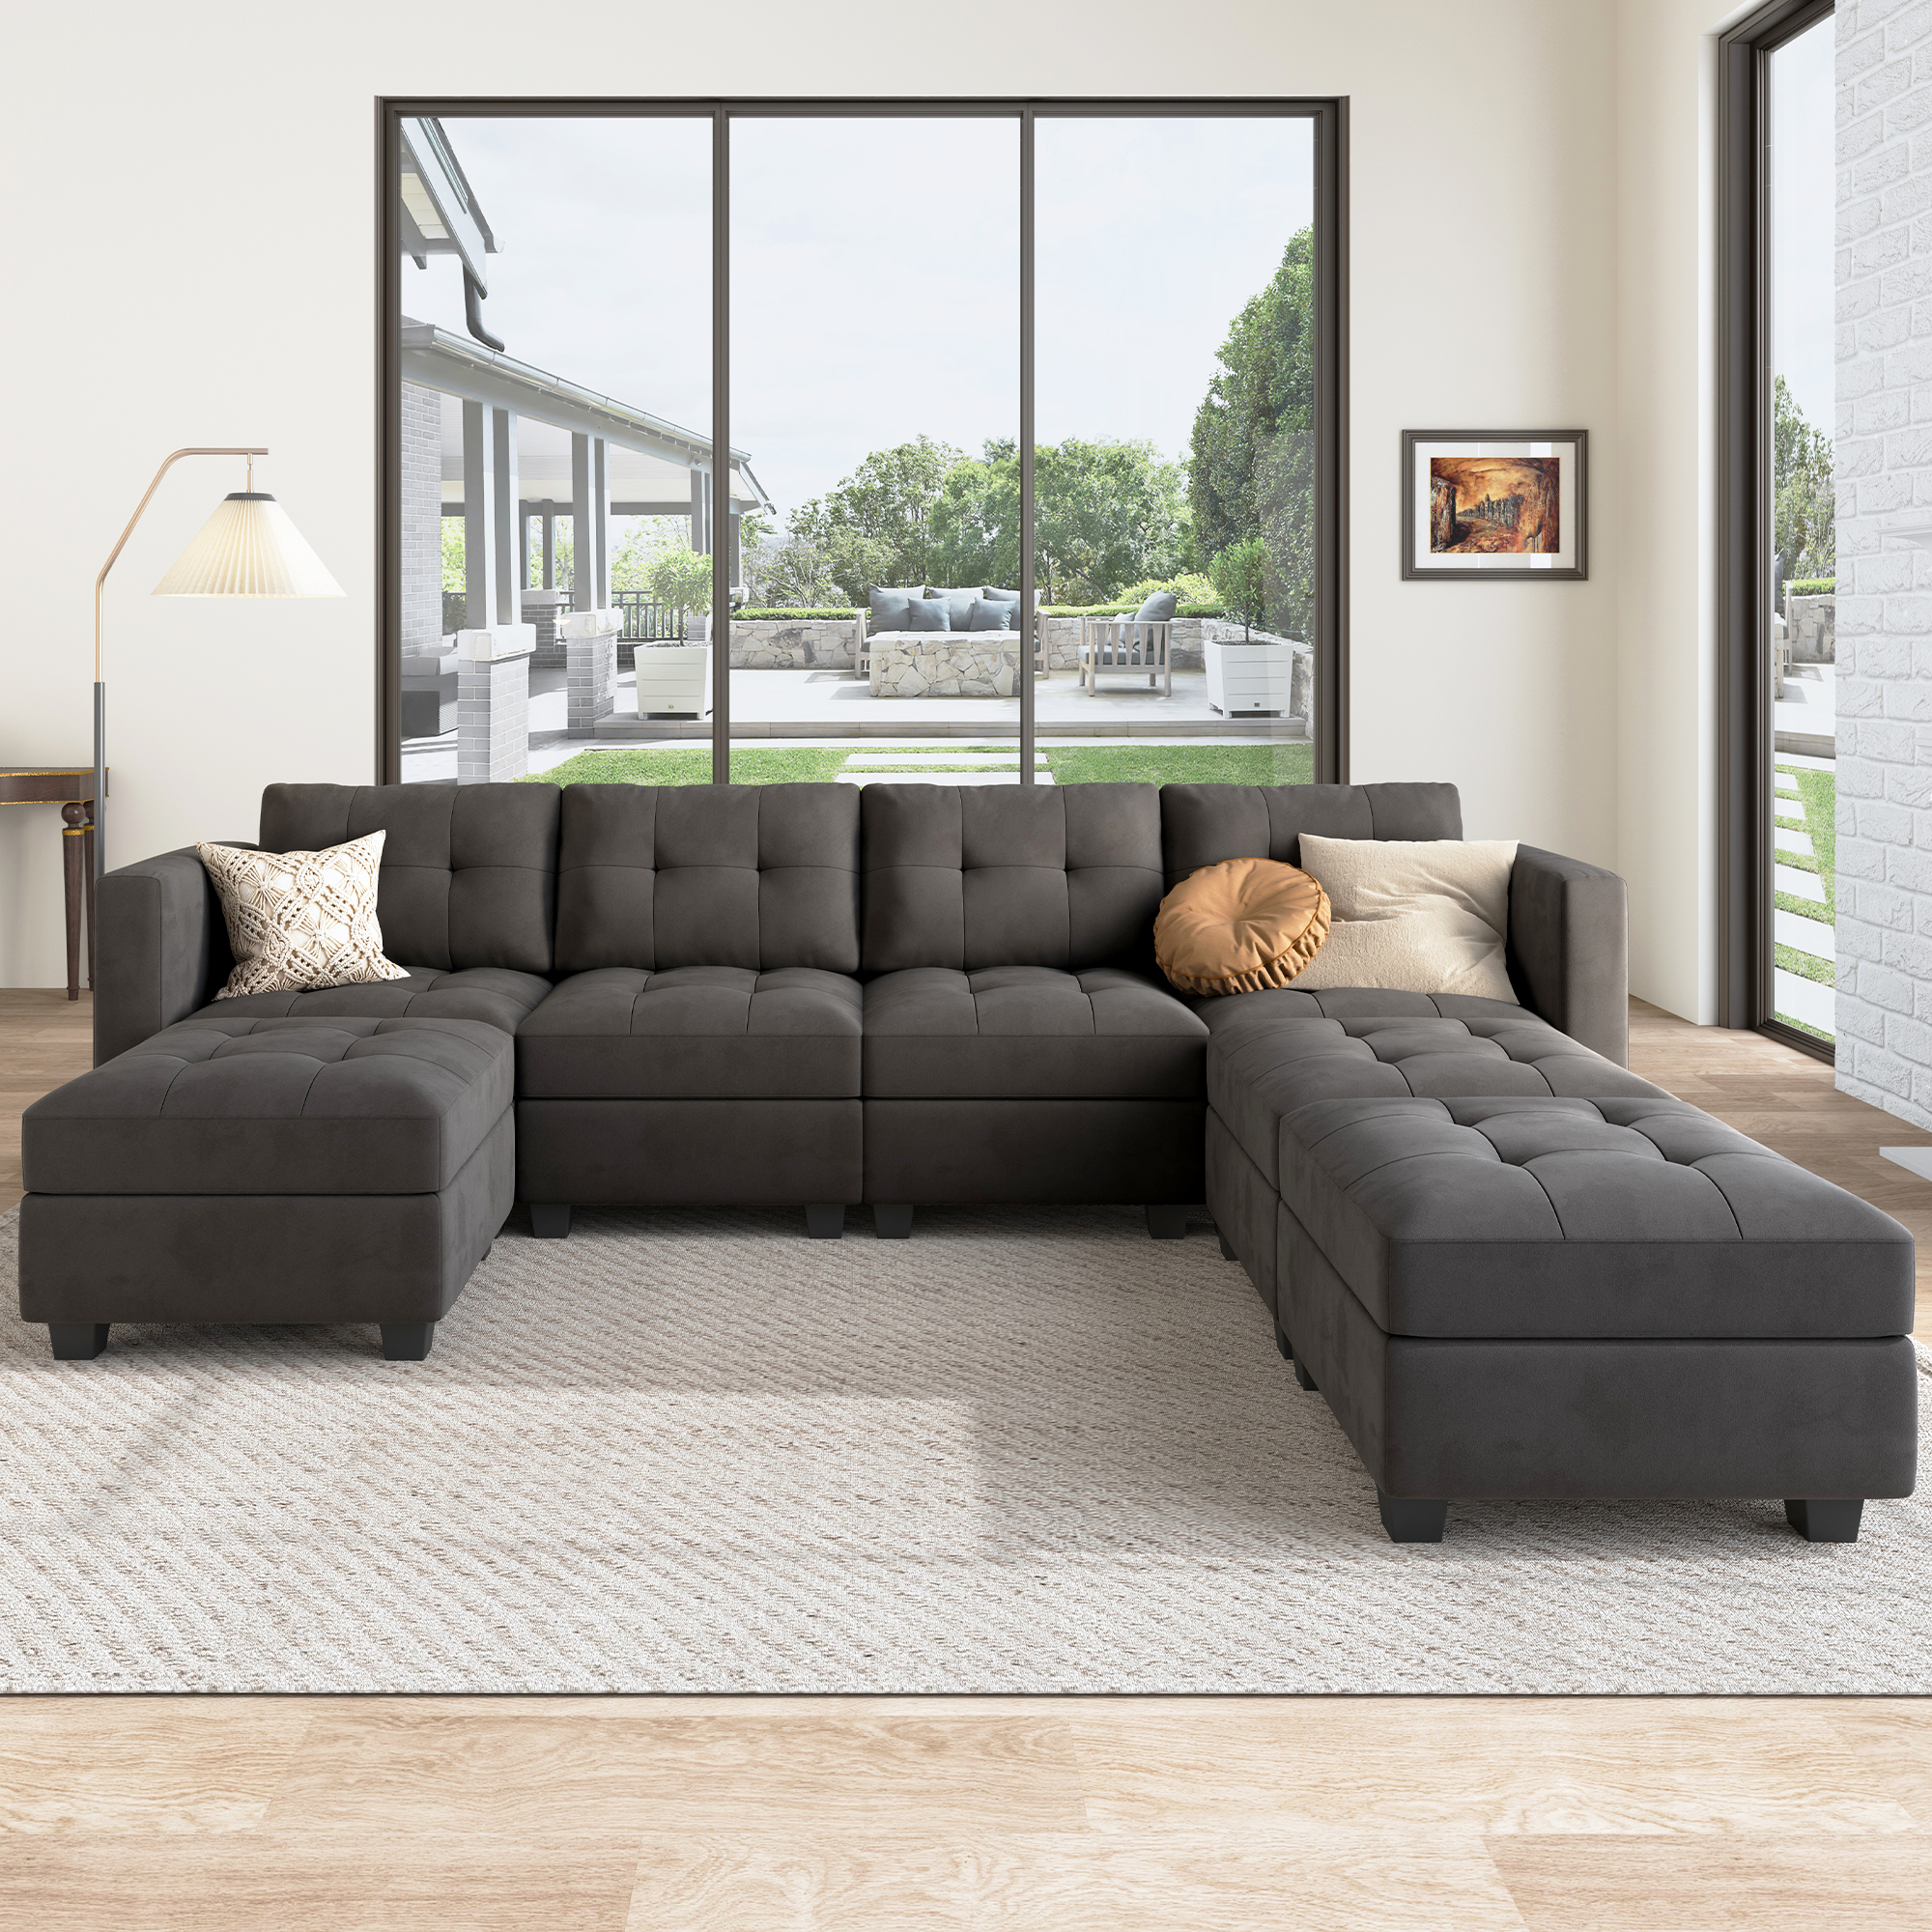 HONBAY 7-Piece Velvet Modular Sectional With Storage Seat